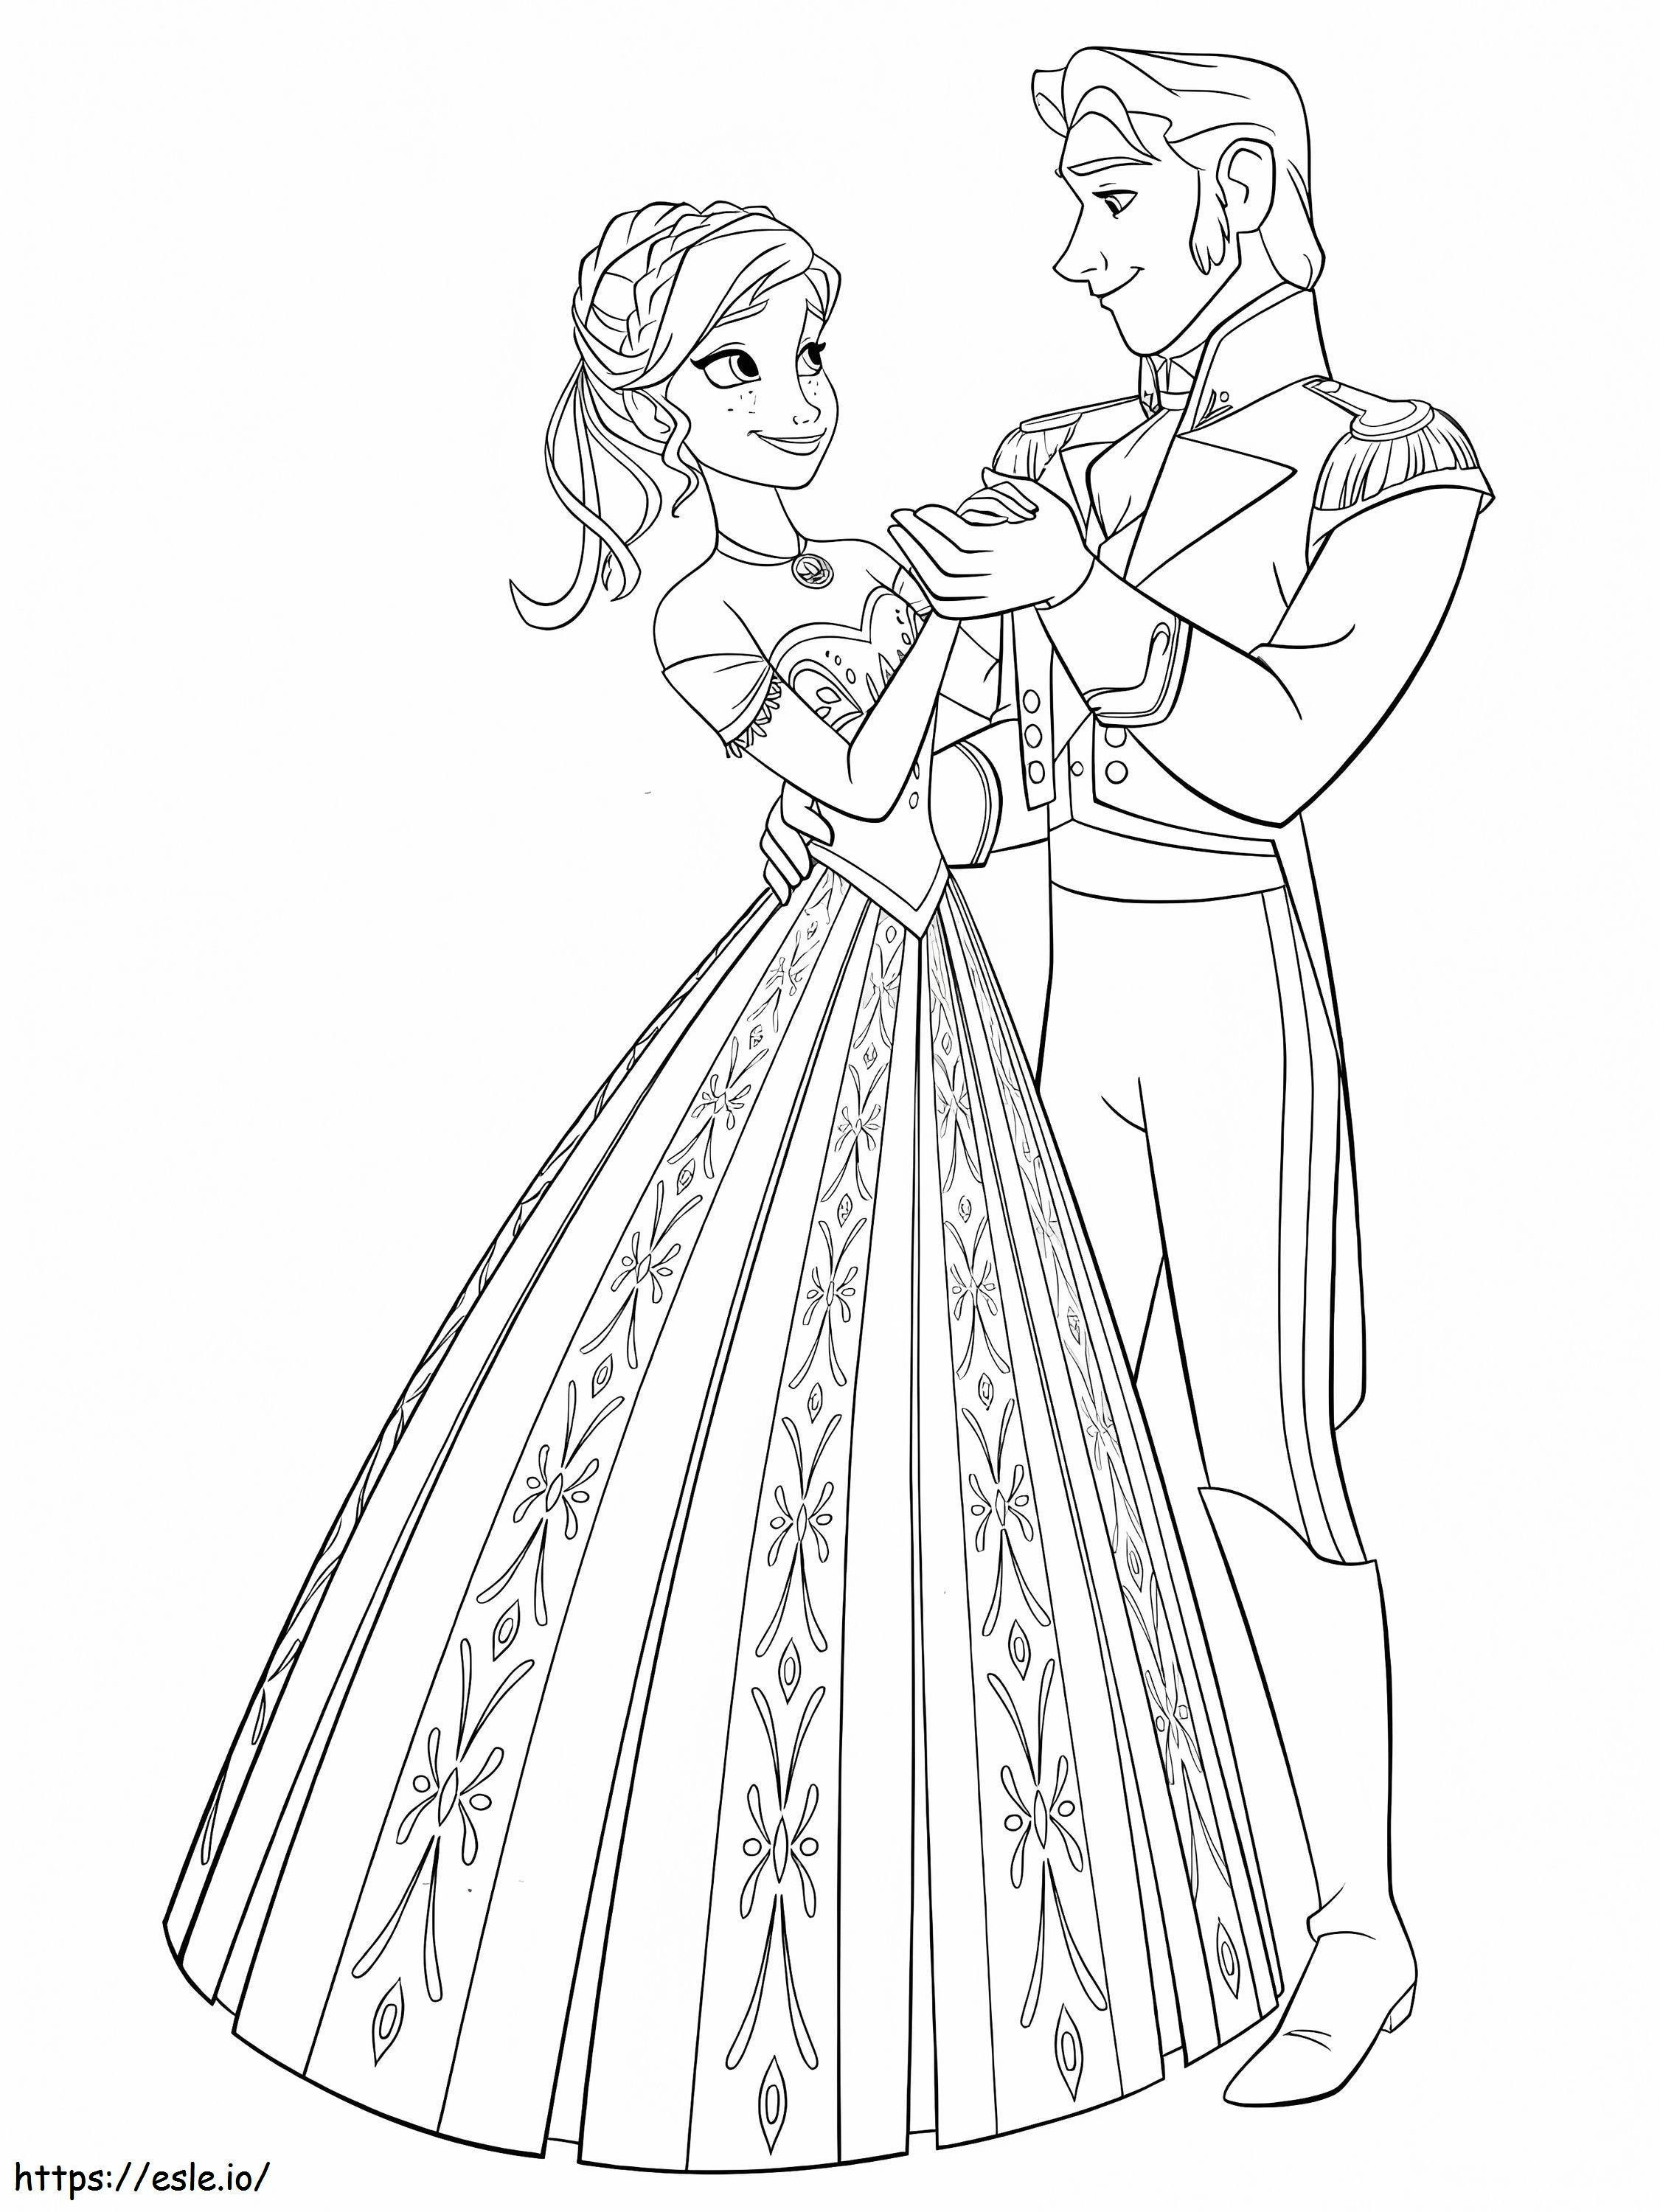 Hans And Anna coloring page